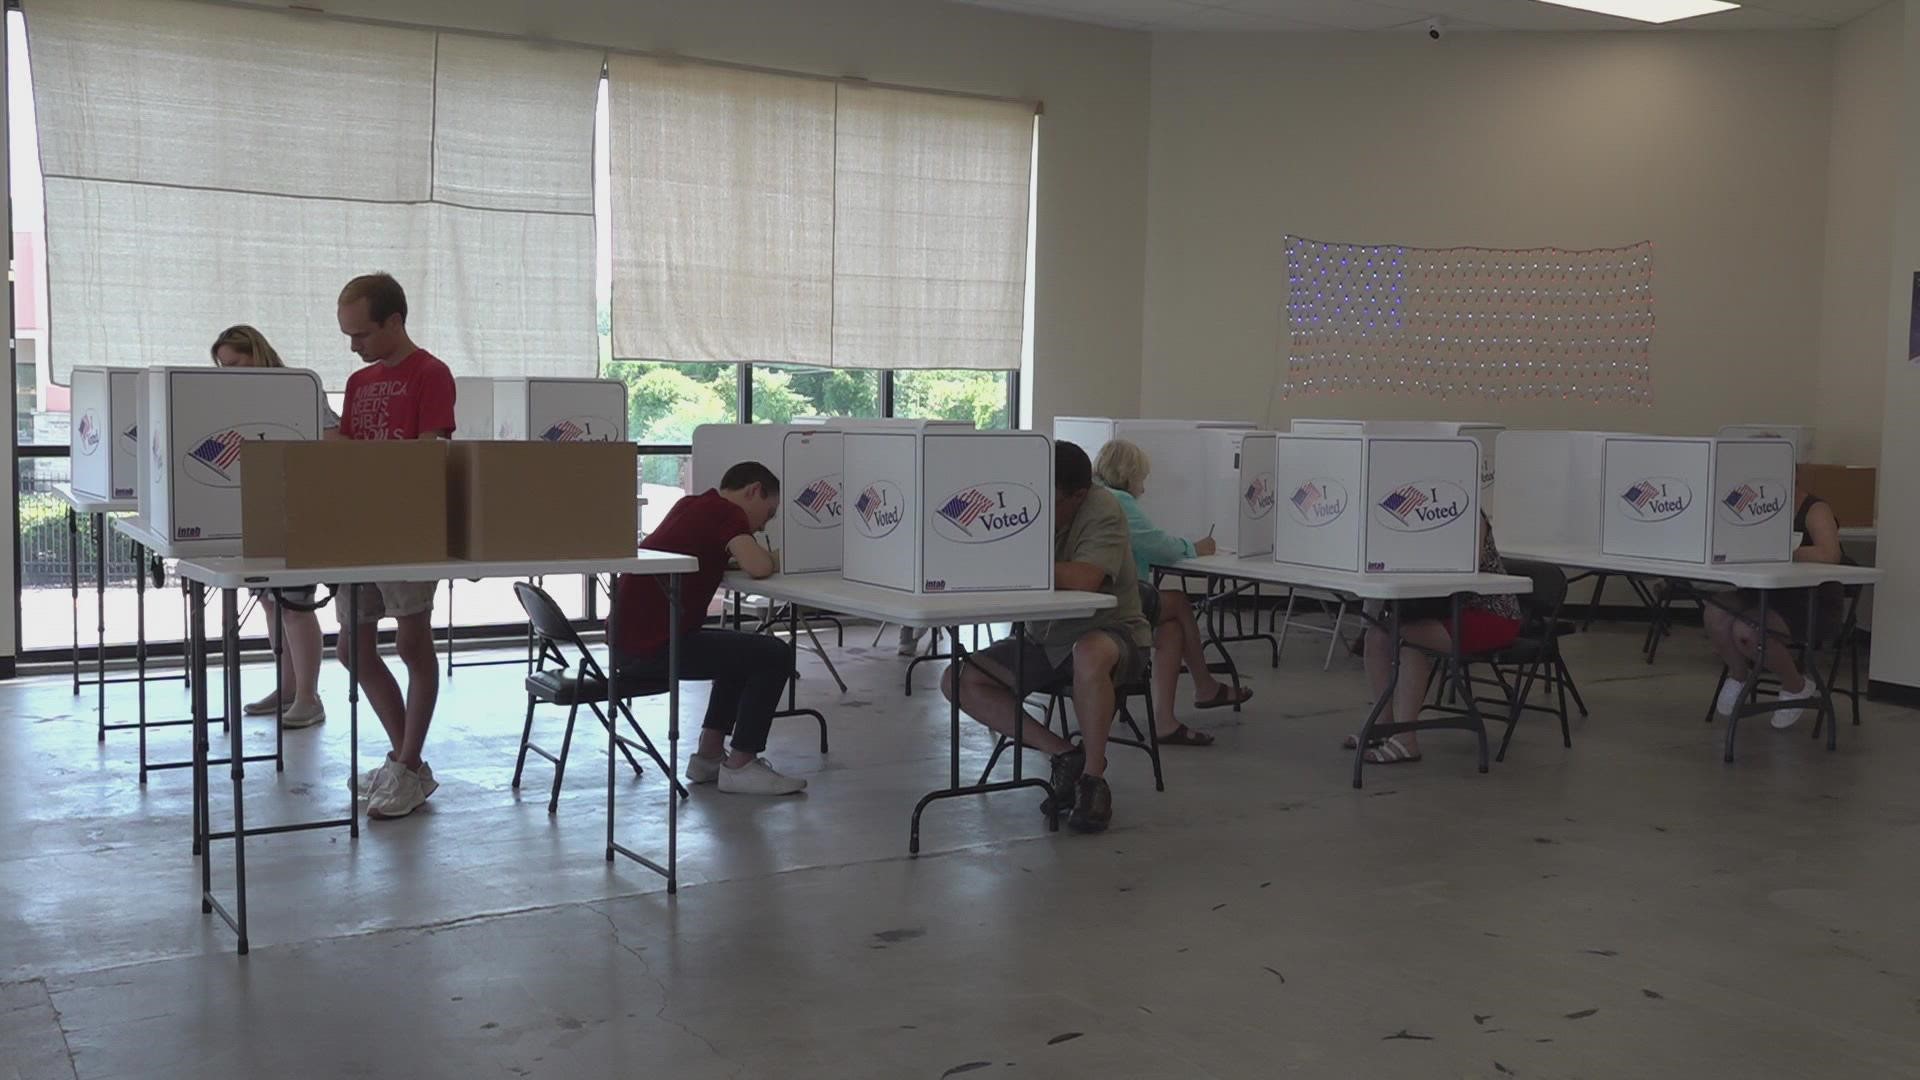 Polls are open for early voting in Tennessee. This time you'll get two ballots to fill out.